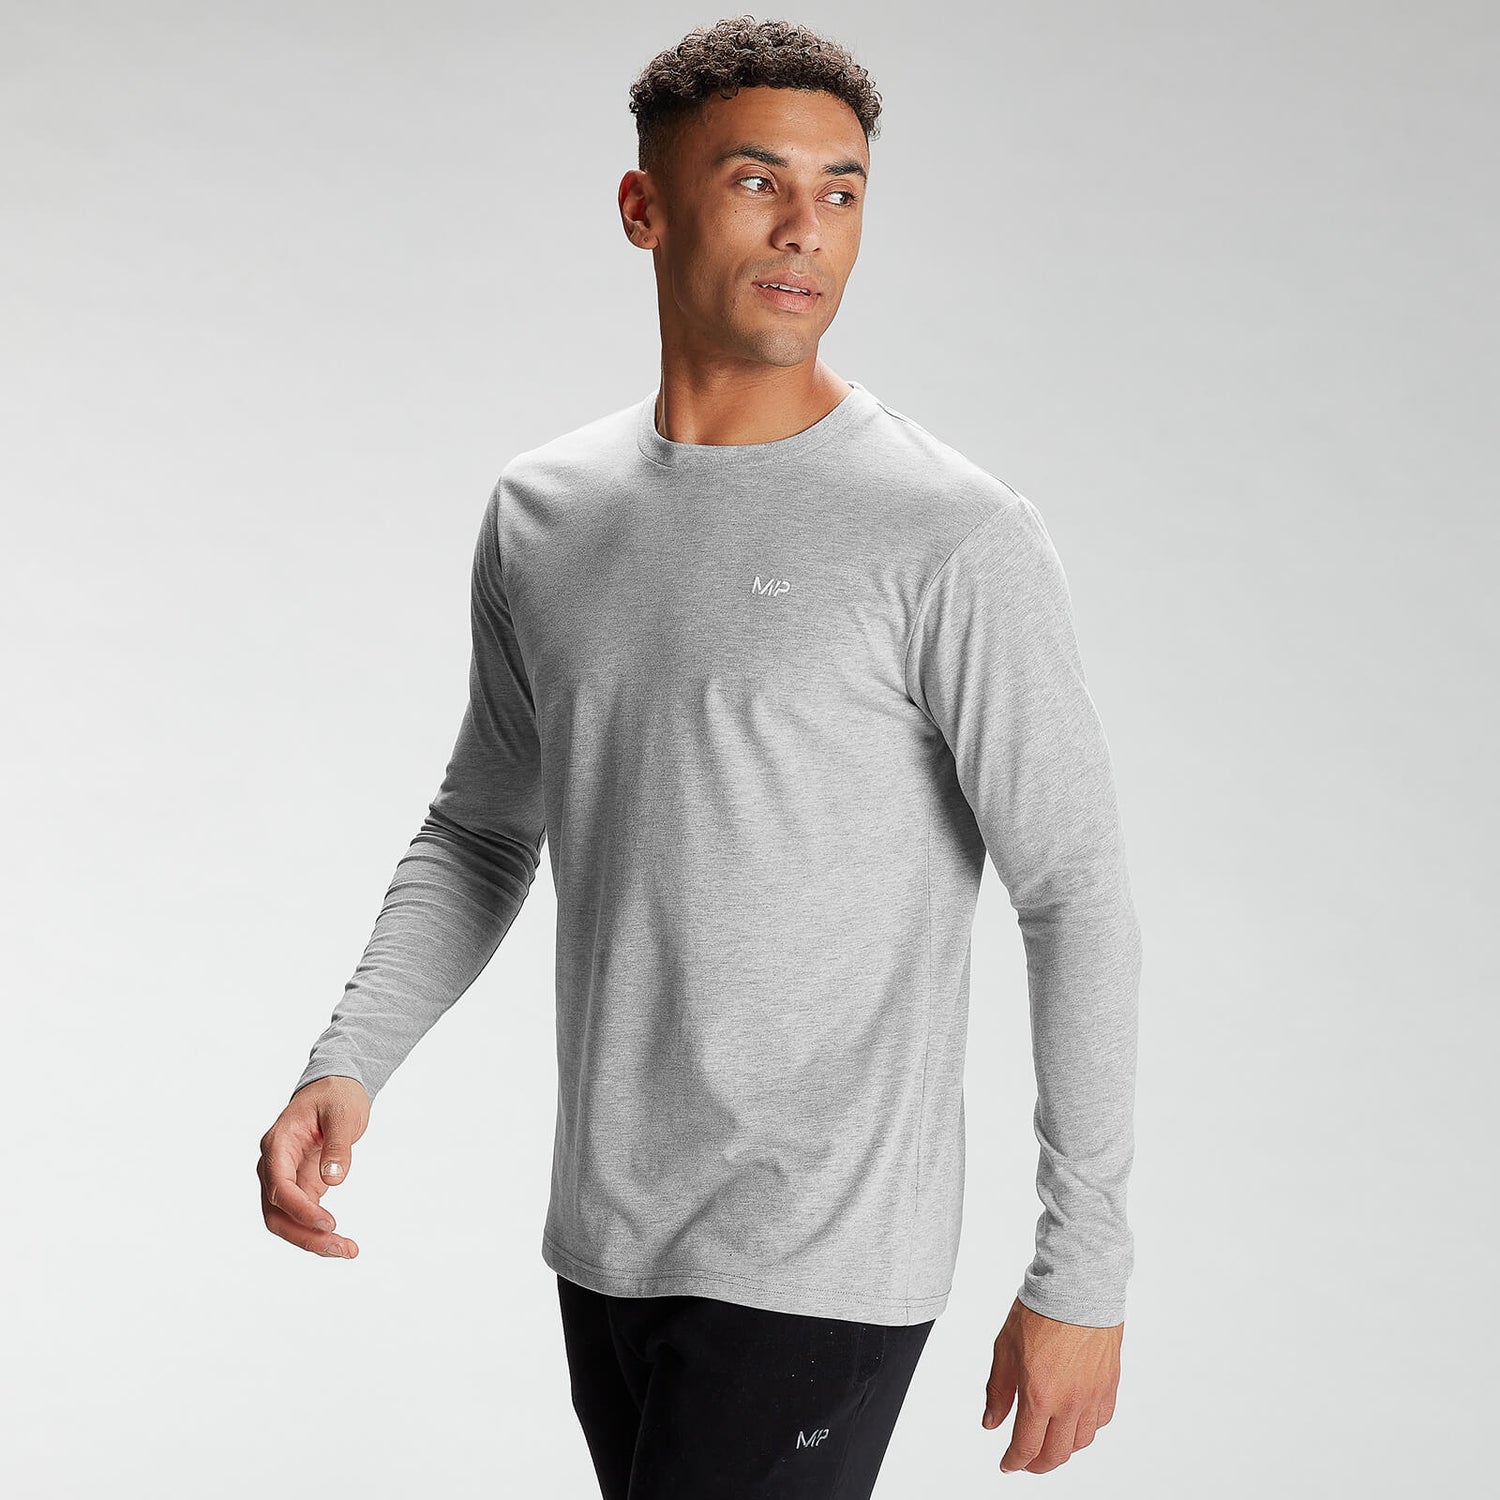 MP Men's Rest Day Long Sleeve Top - Classic Grey Marl - M